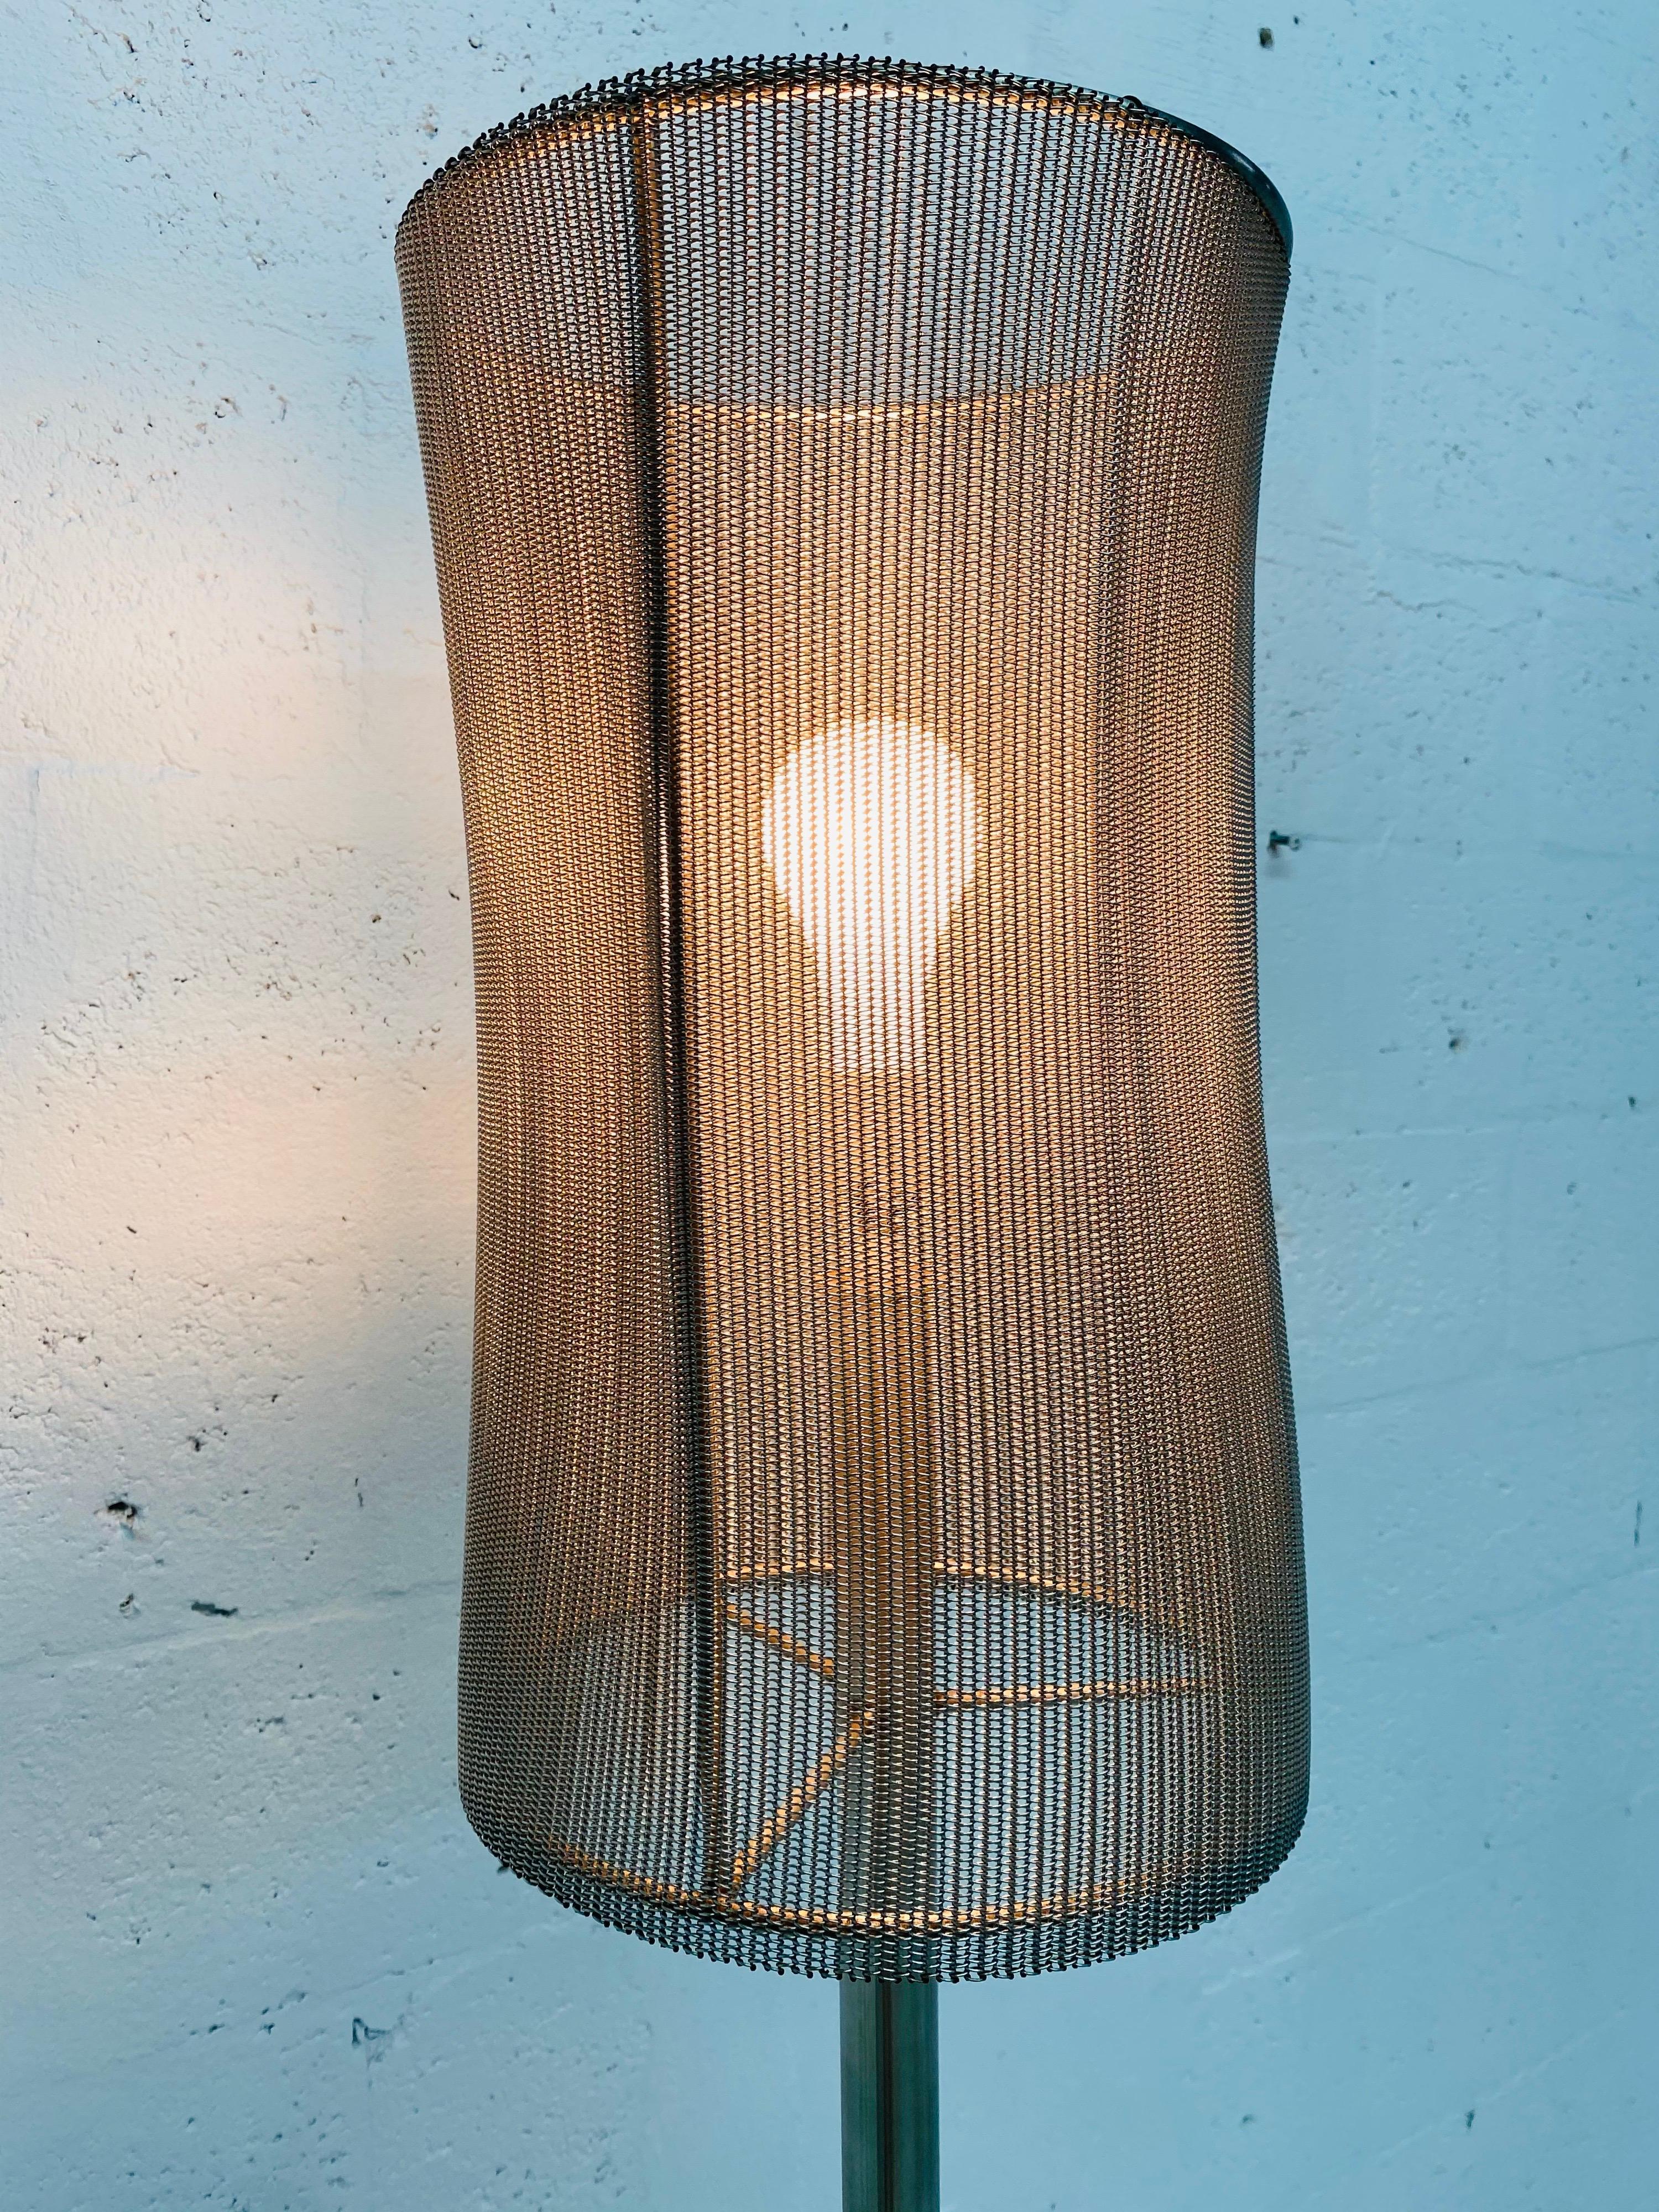 Custom Welded Steel and Mesh Shade Floor Lamp by Automatic, Inc. For Sale 3